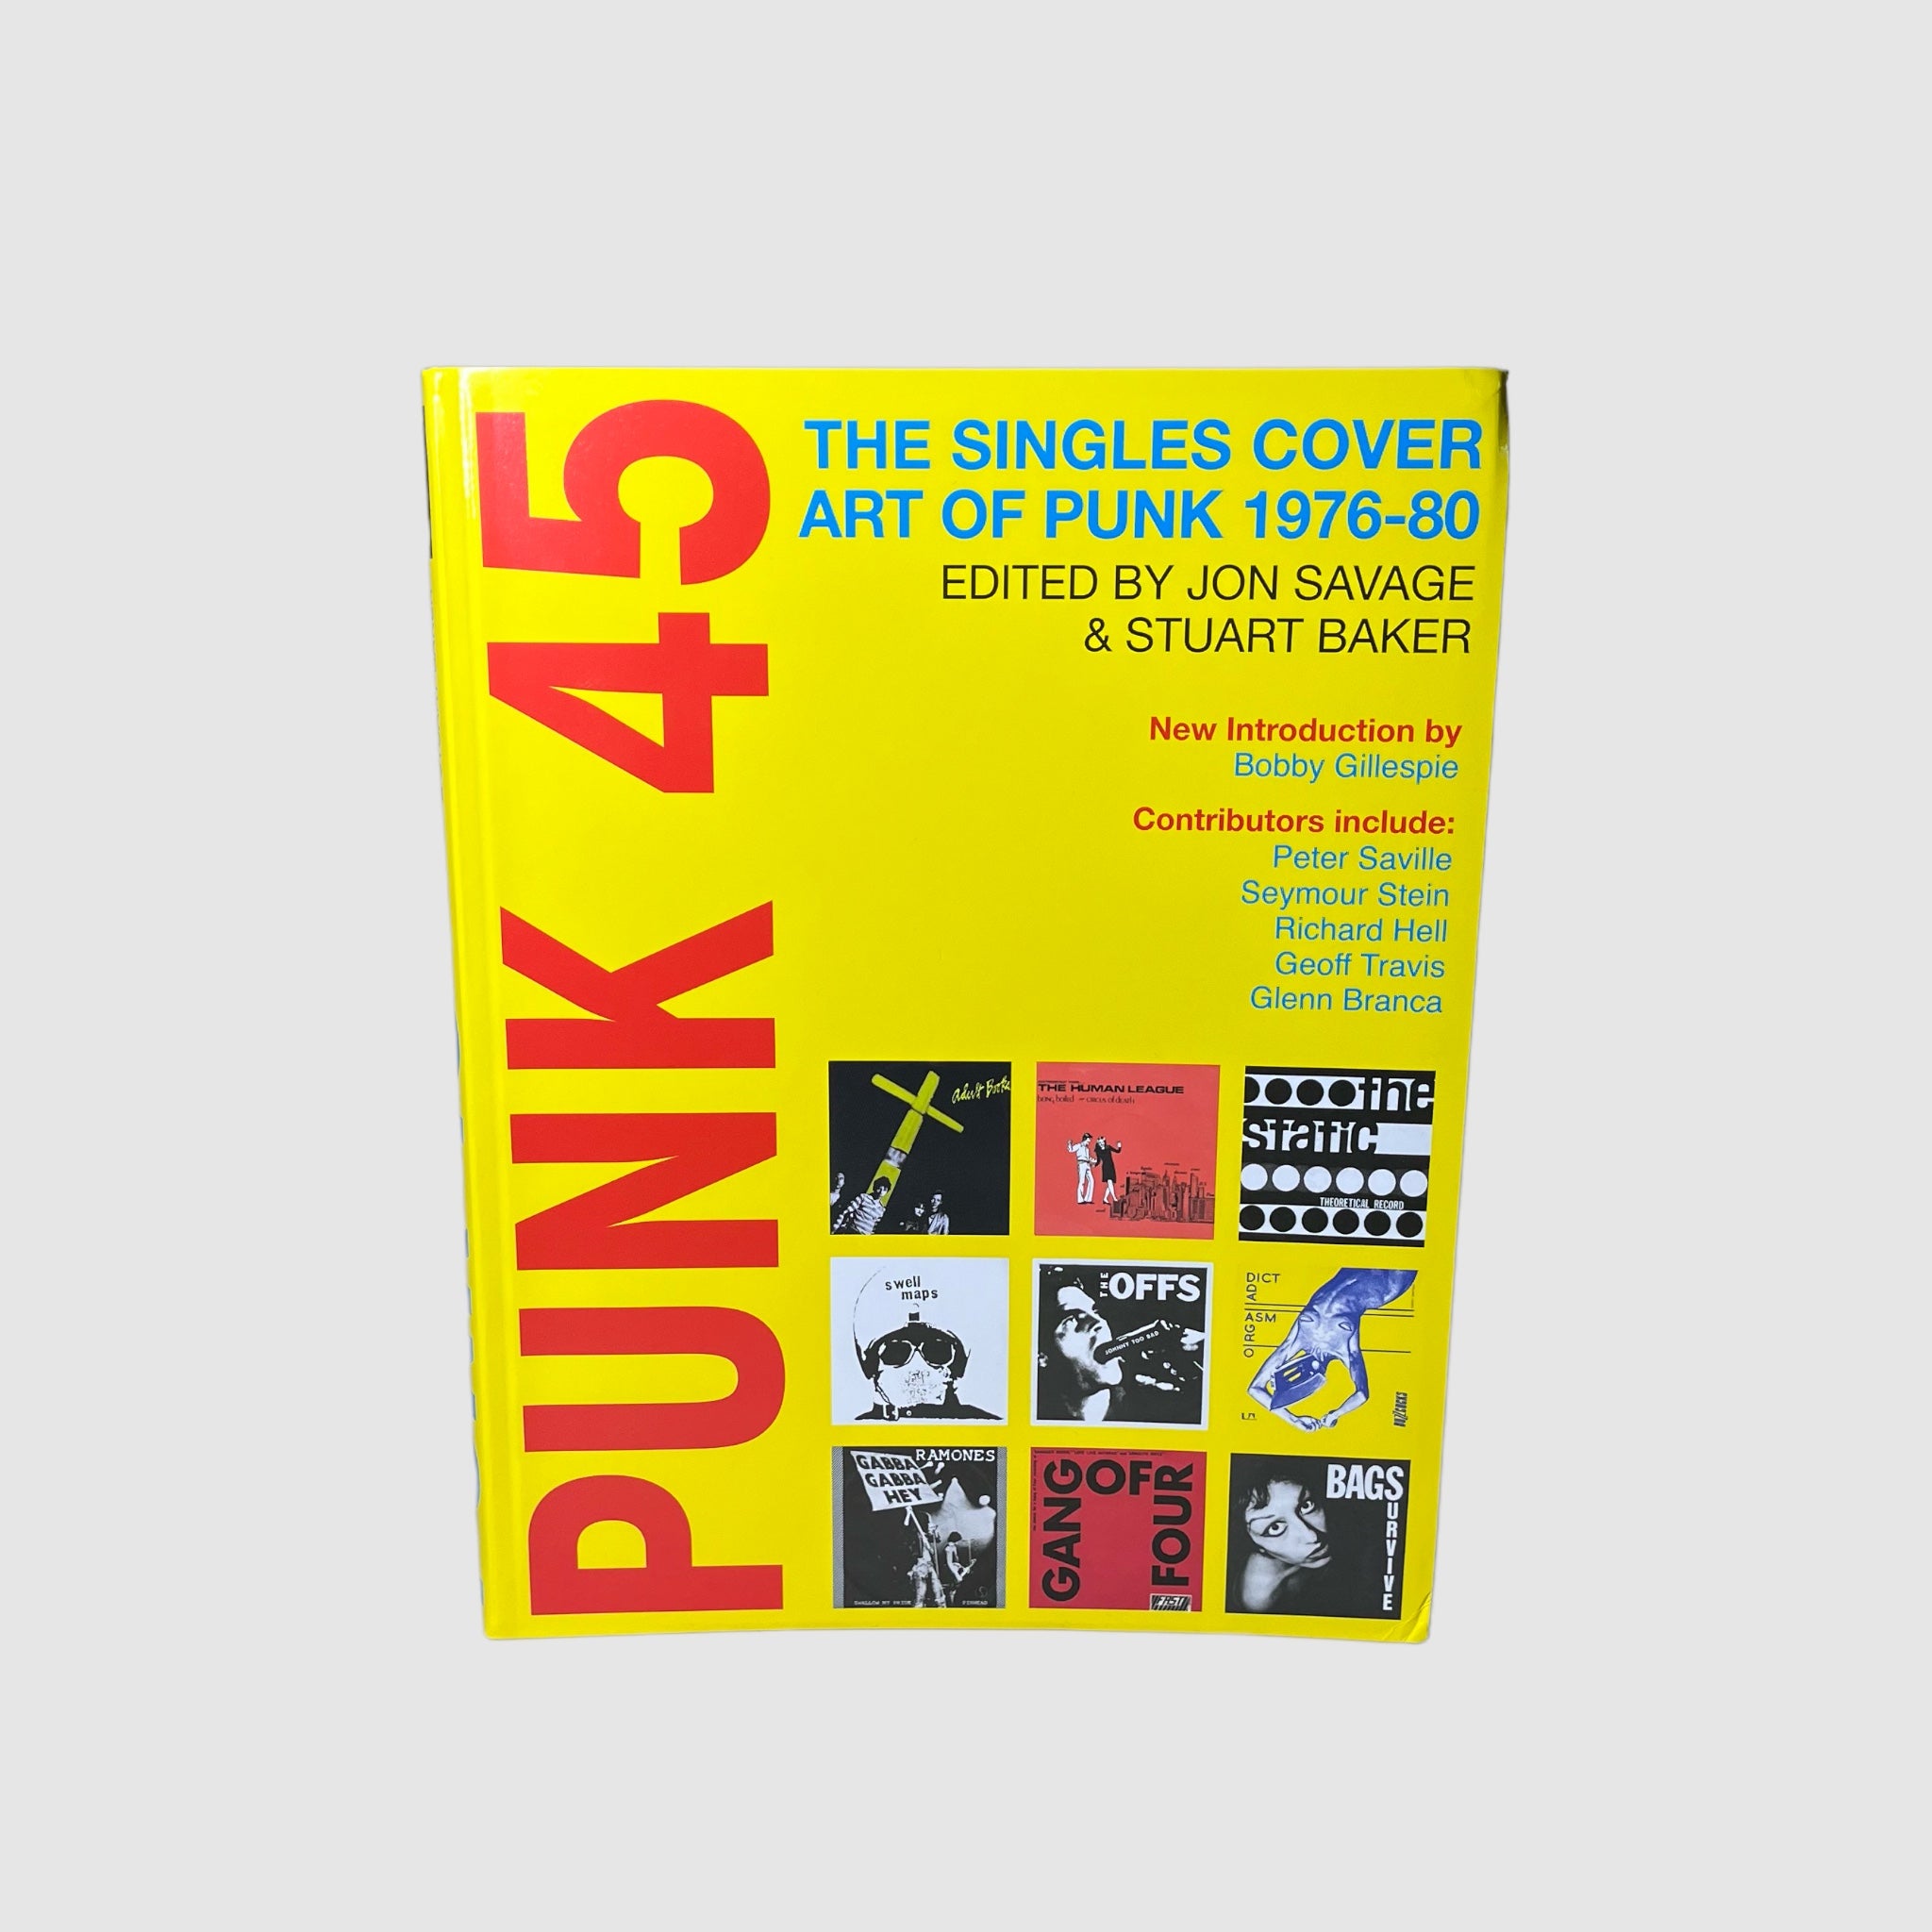 PUNK 45 // THE SINGLES COVER ART OF PUNK 1976-80